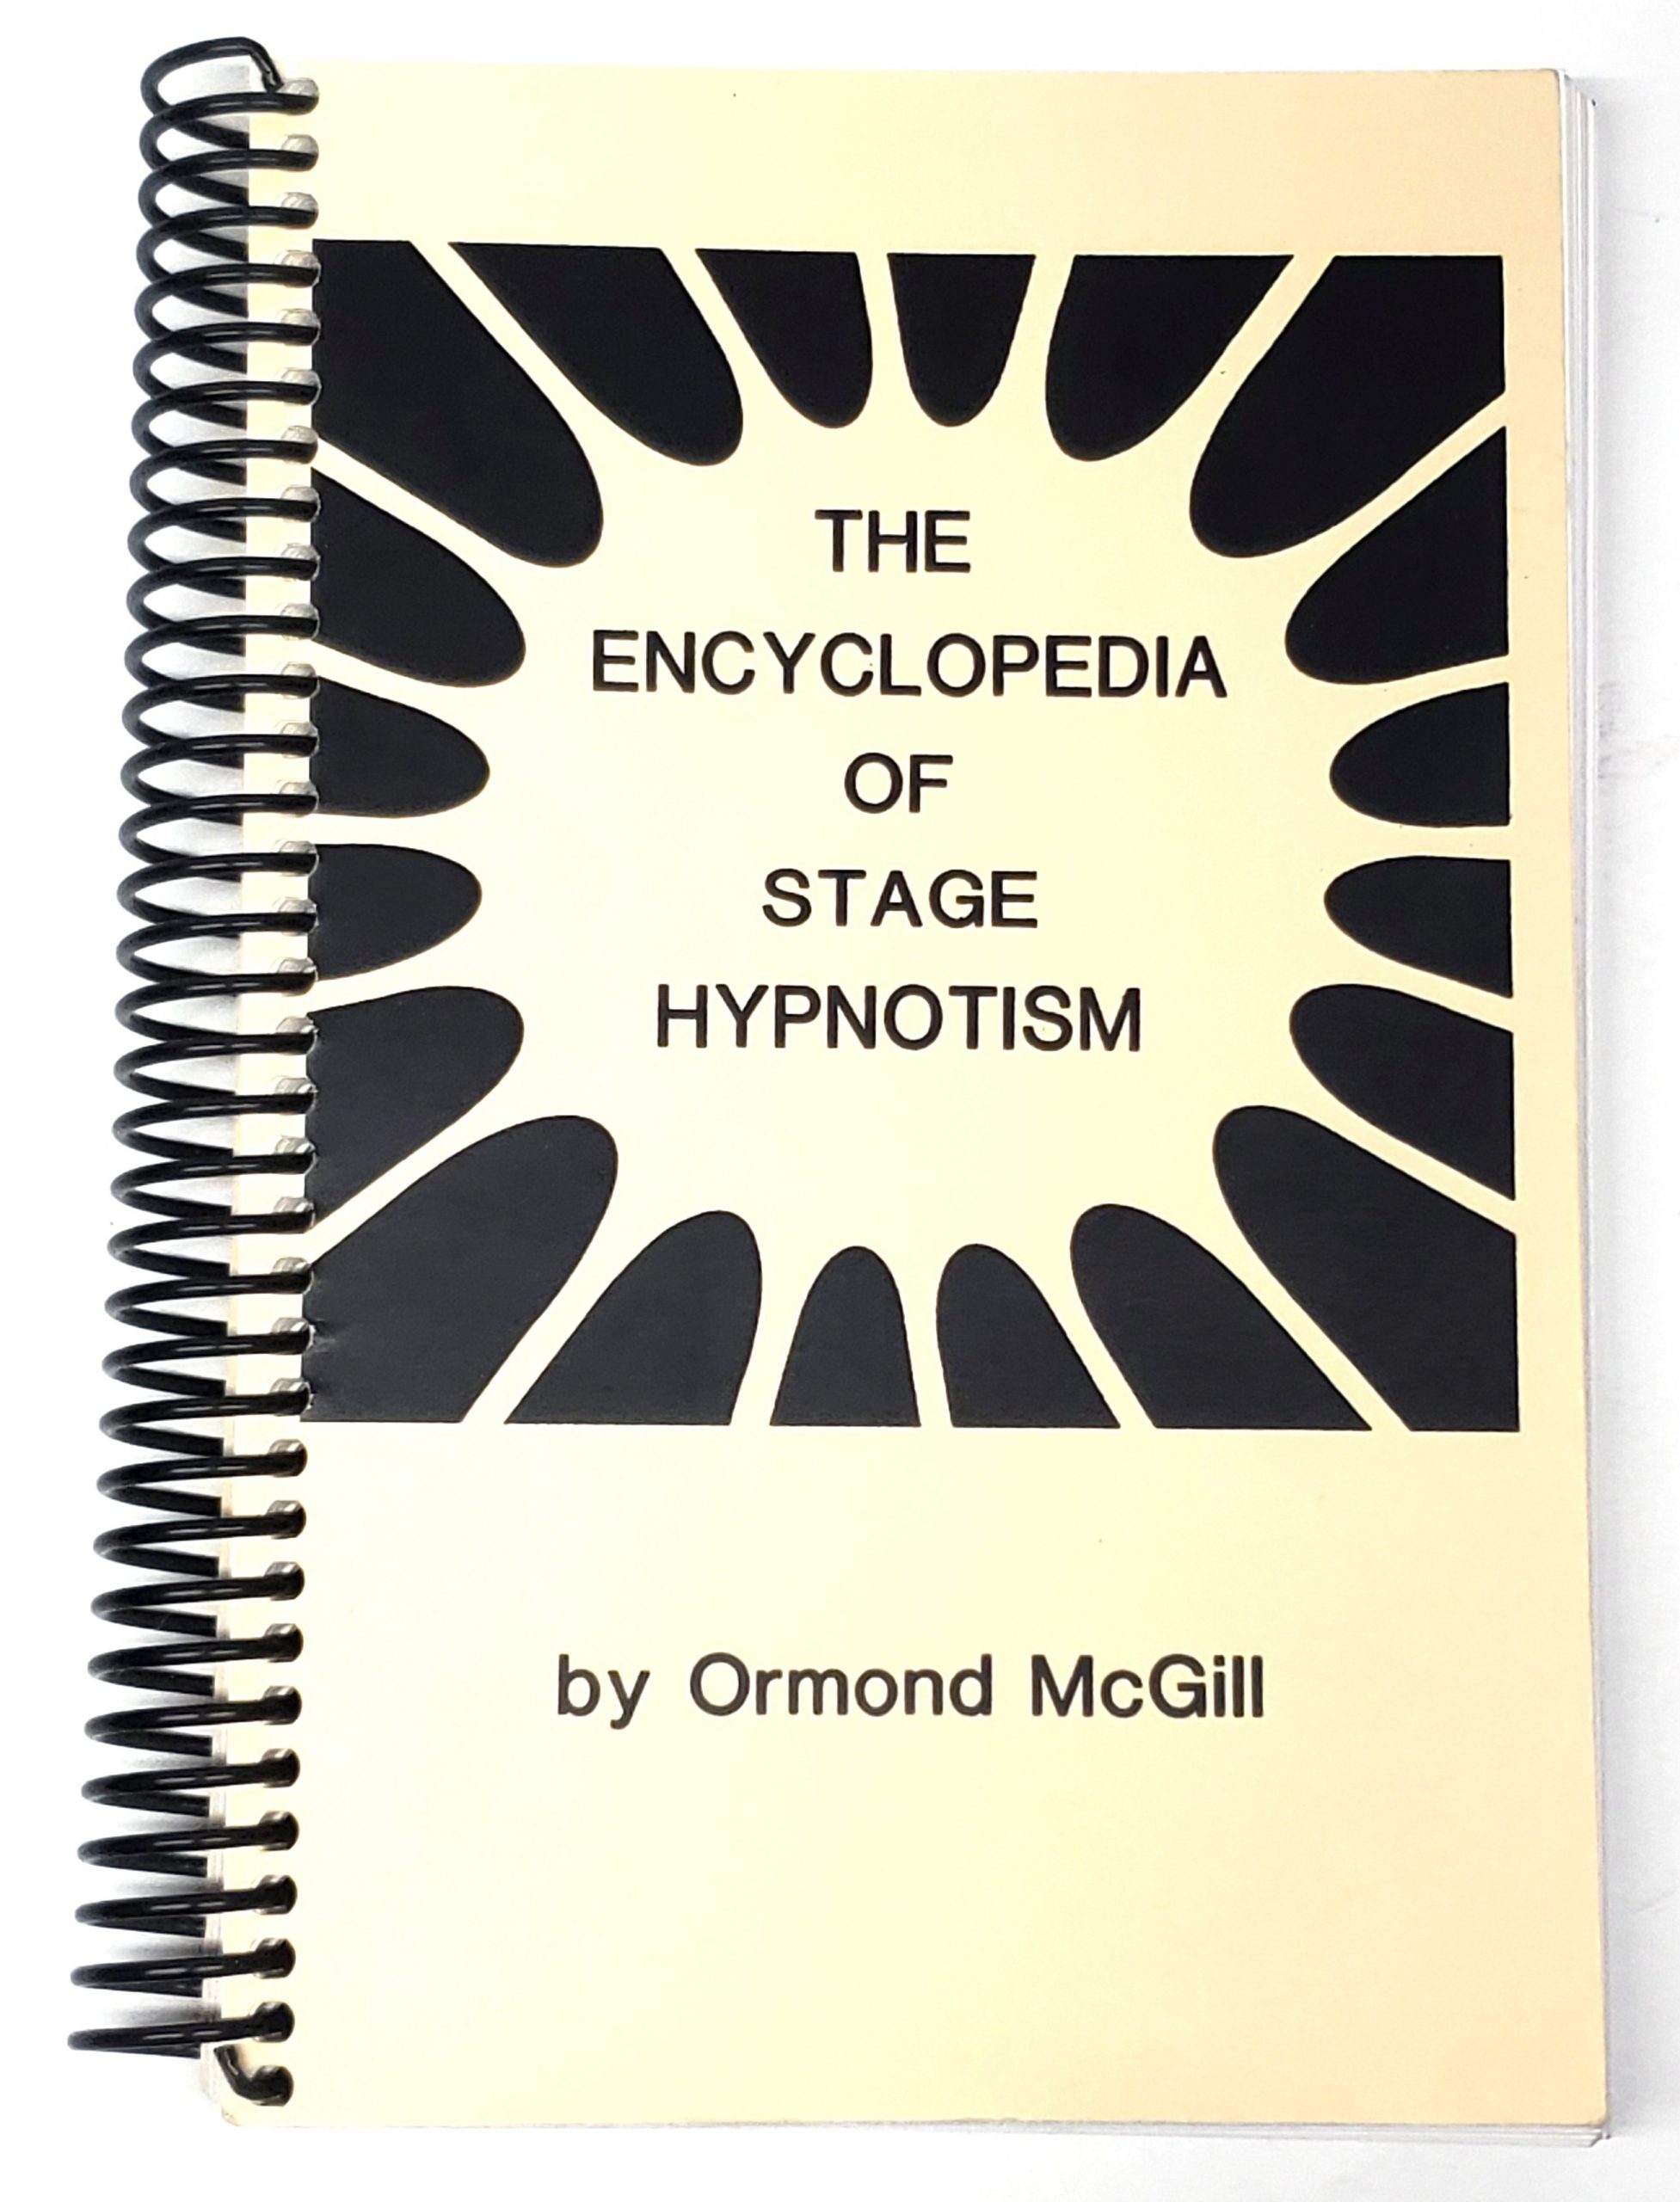 The new encyclopedia of stage hypnotism